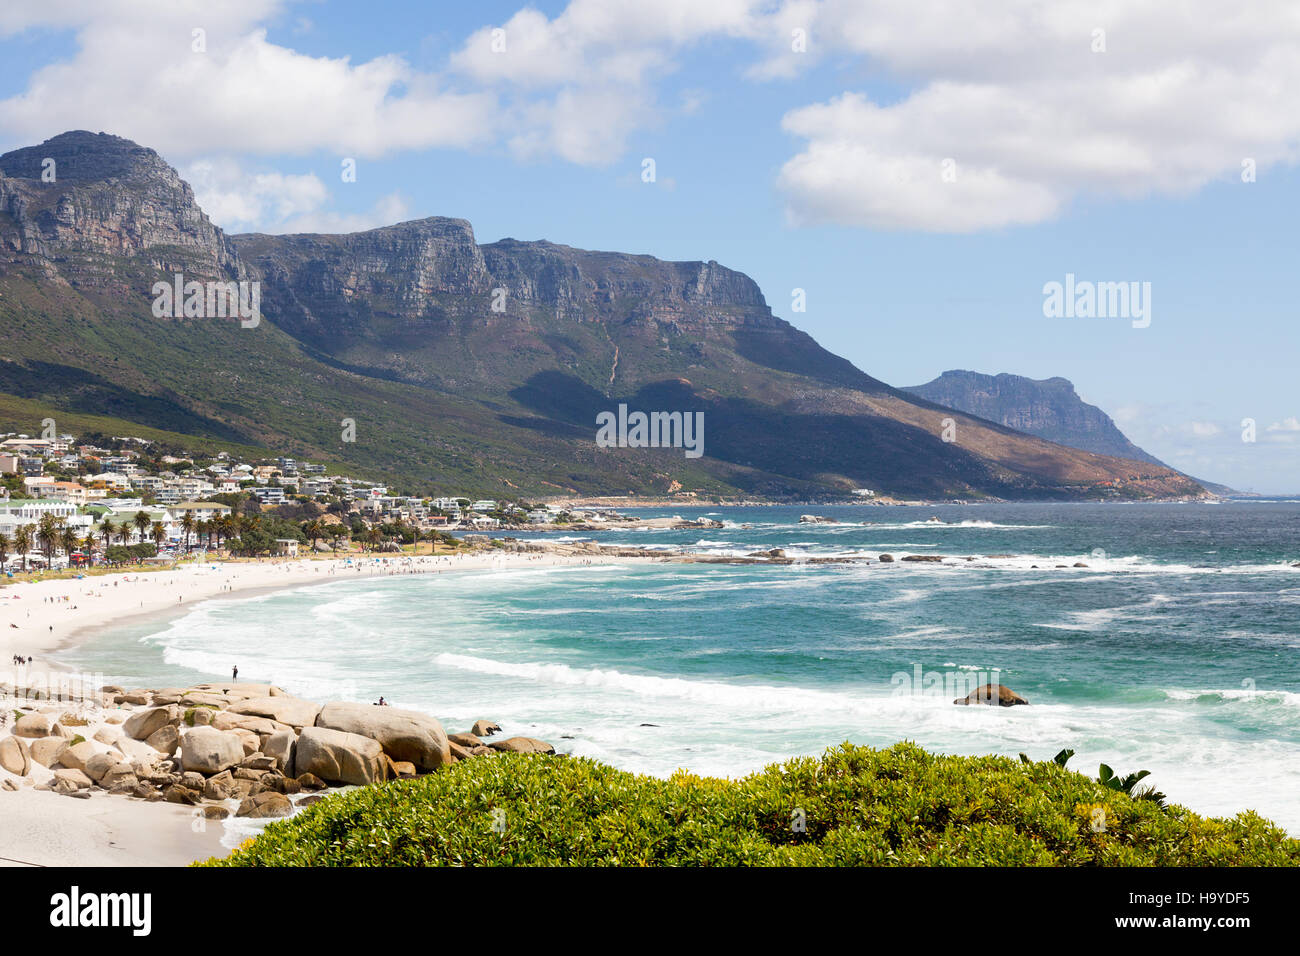 Camps Bay beach and the Twelve Apostles mountains, Cape Town, South Africa Stock Photo